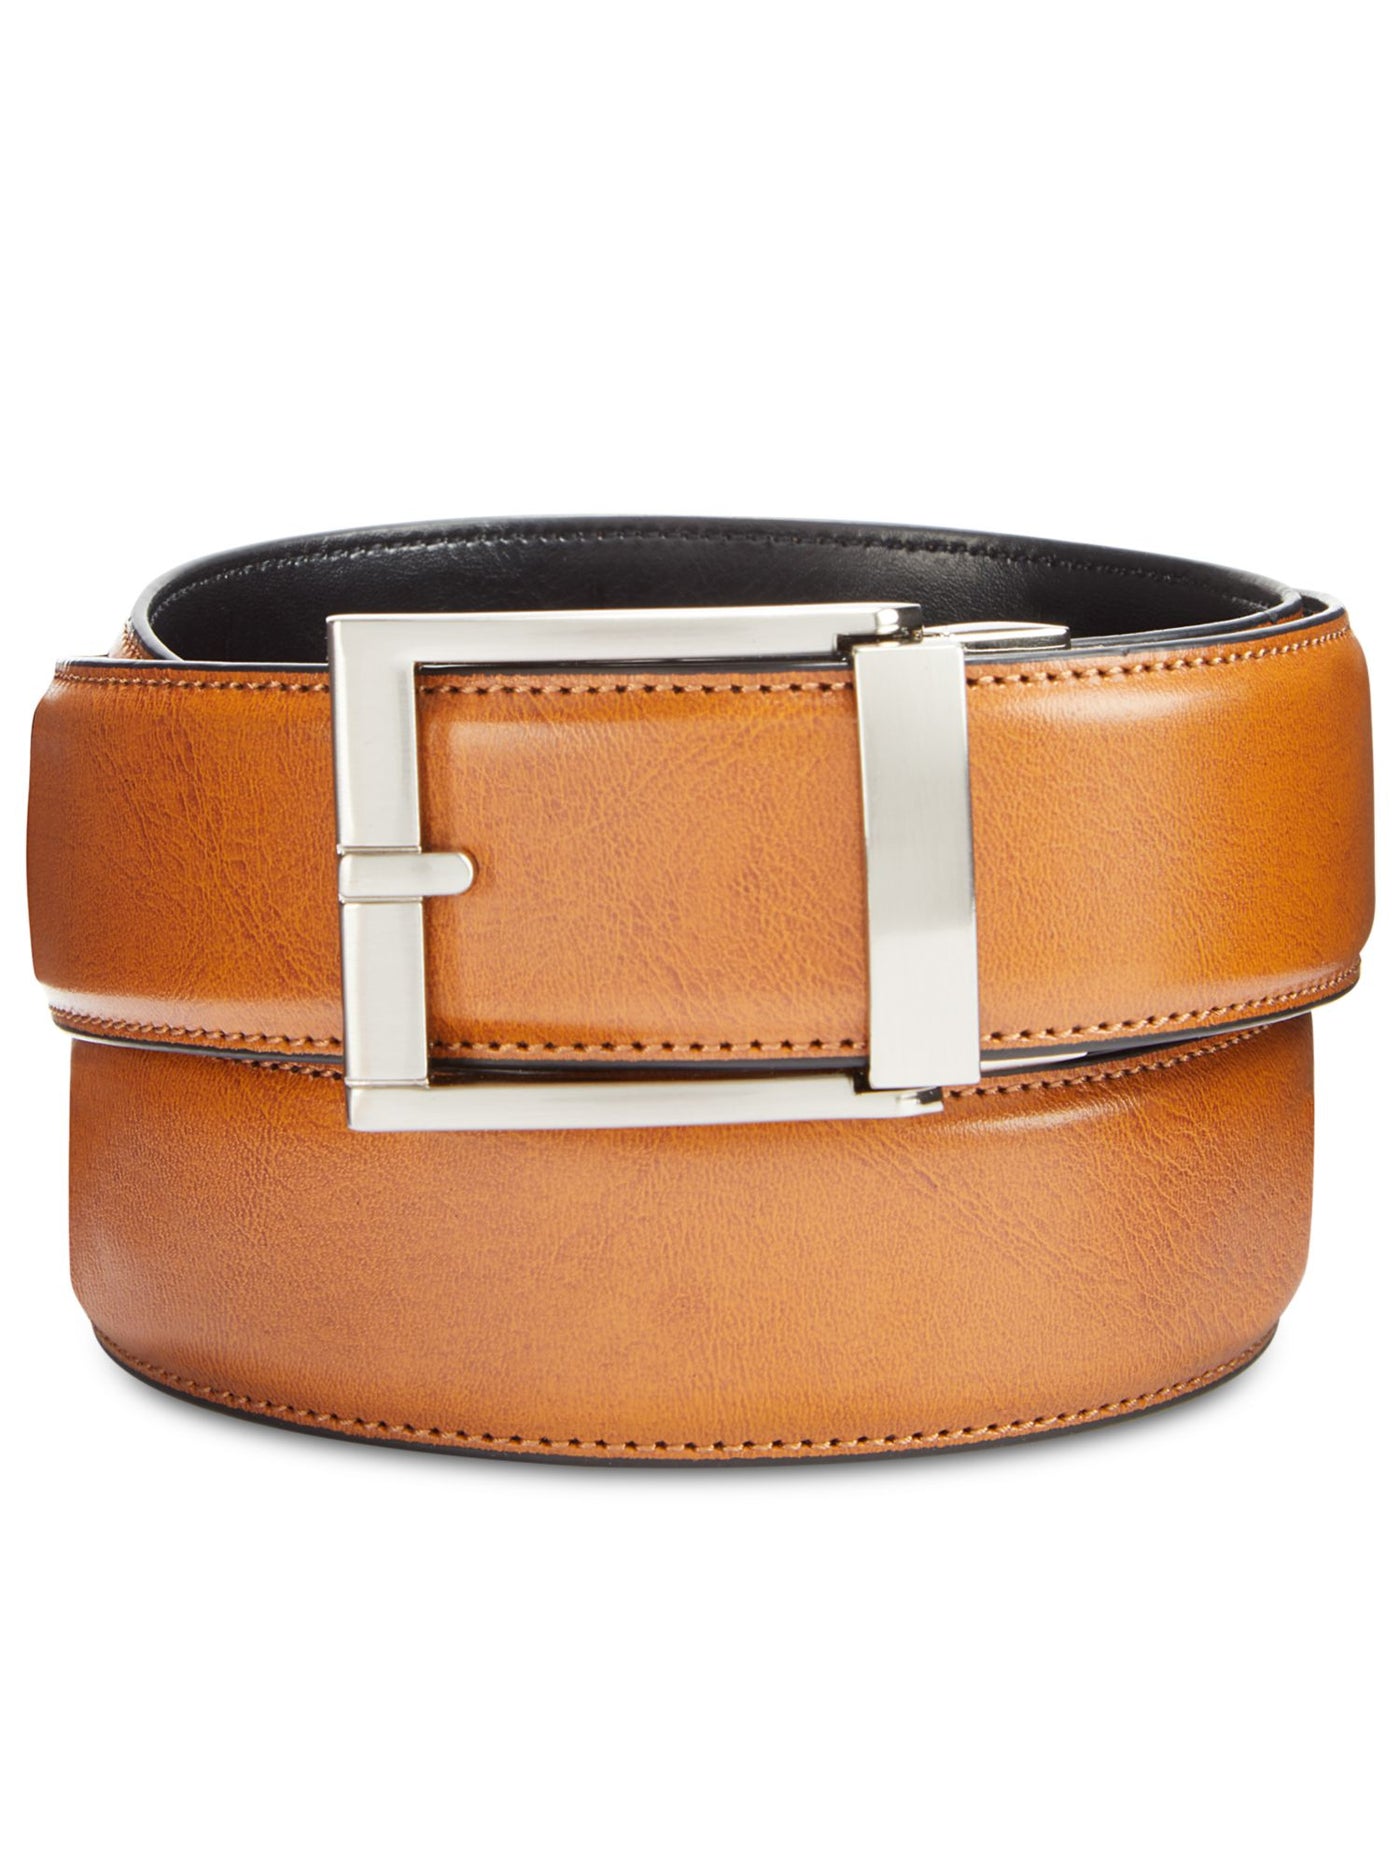 THE GIFT Mens Brown Faux Leather Casual Belt 48